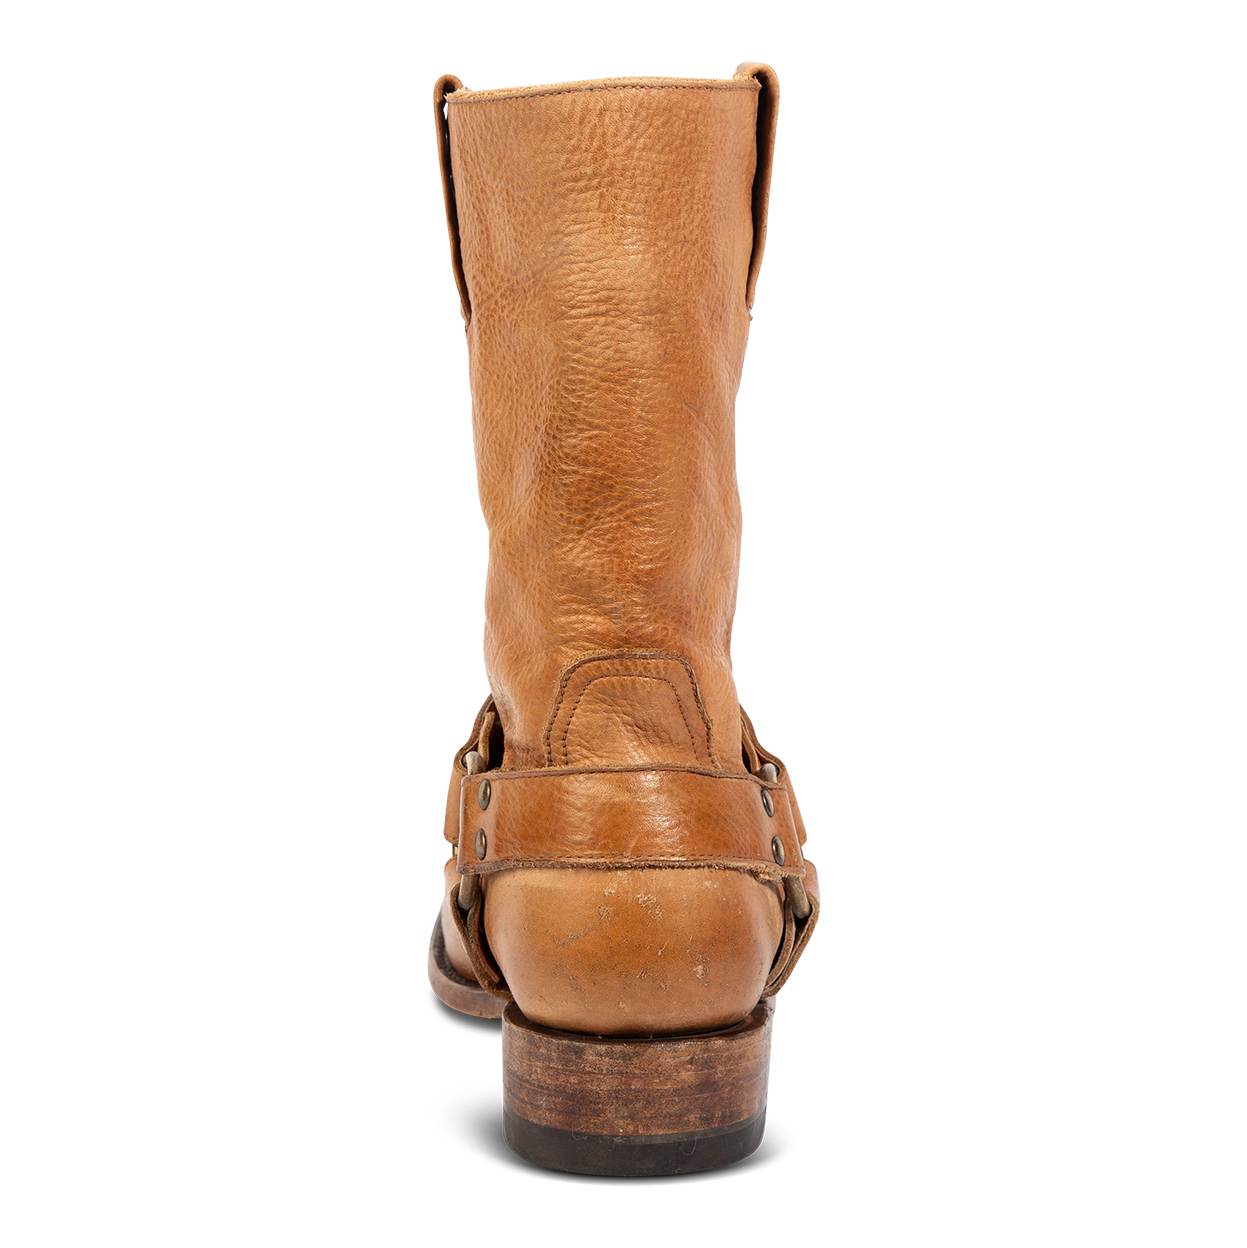 Back view showing distressed heel and leather ankle harness on FREEBIRD men's Copperhead banana boot